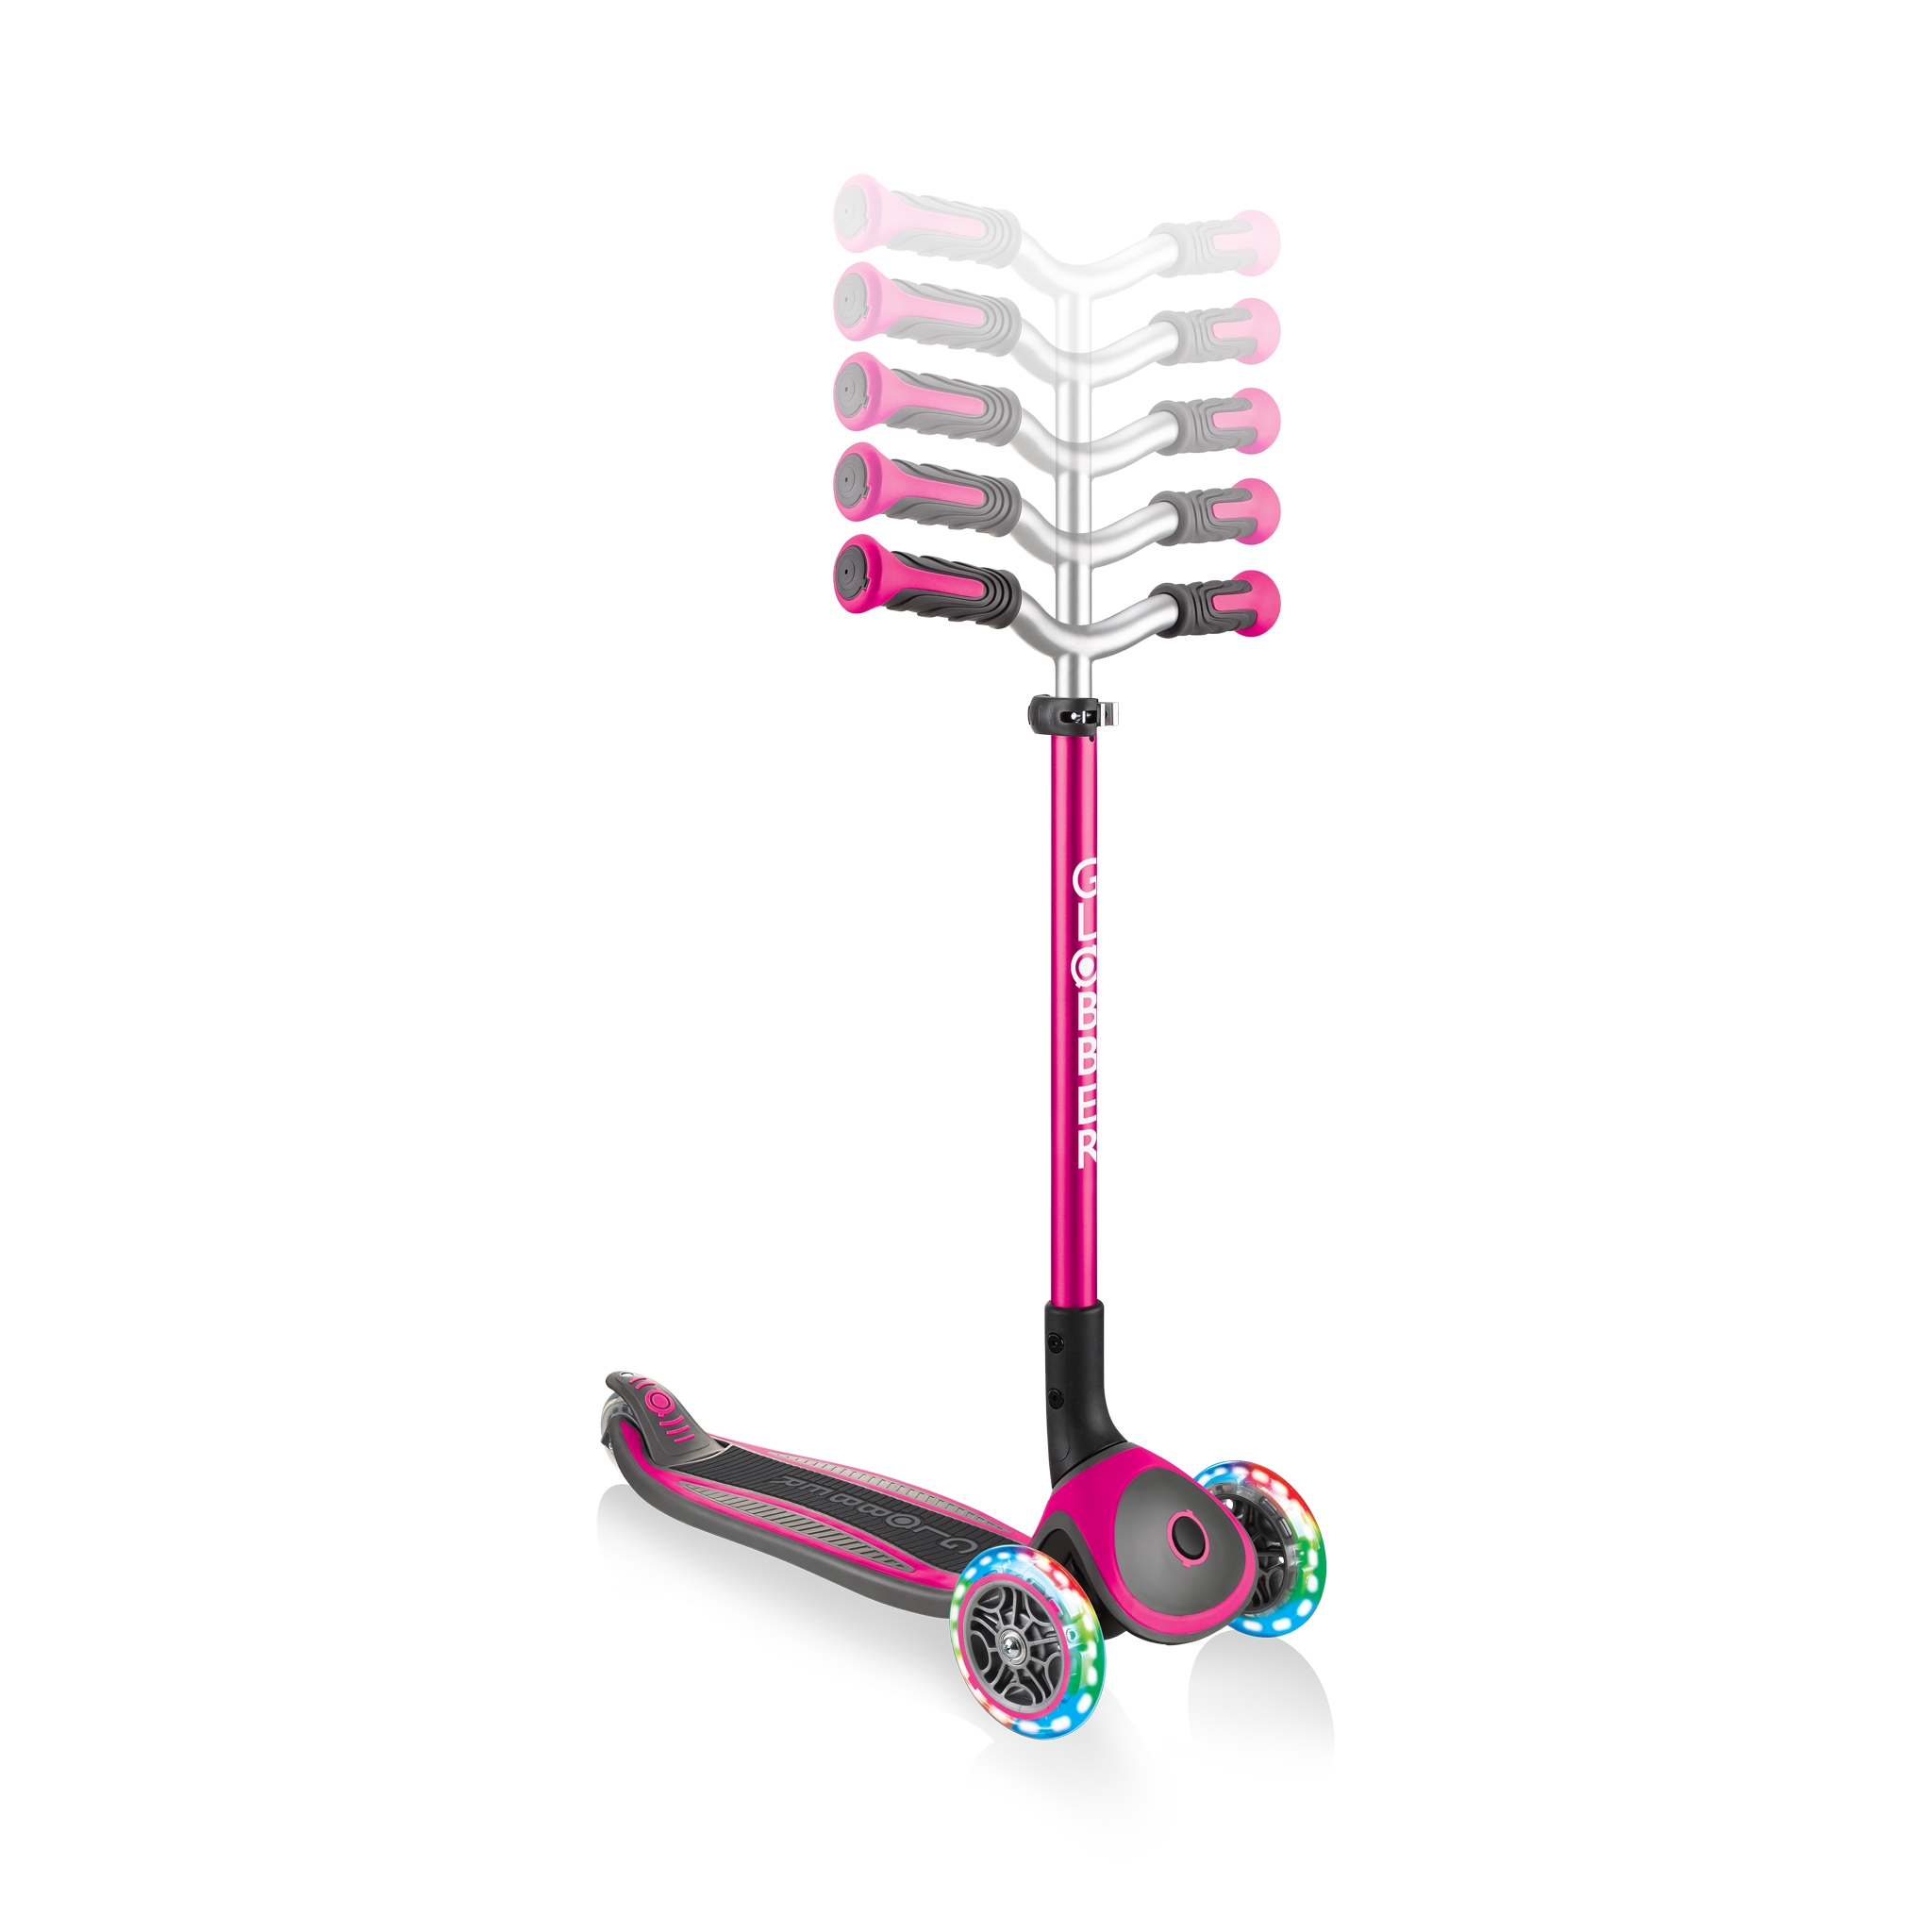 Globber-MASTER-LIGHTS-premium-3-wheel-foldable-light-up-scooters-for-kids-with-5-height-adjustable-T-bar_deep-pink 2